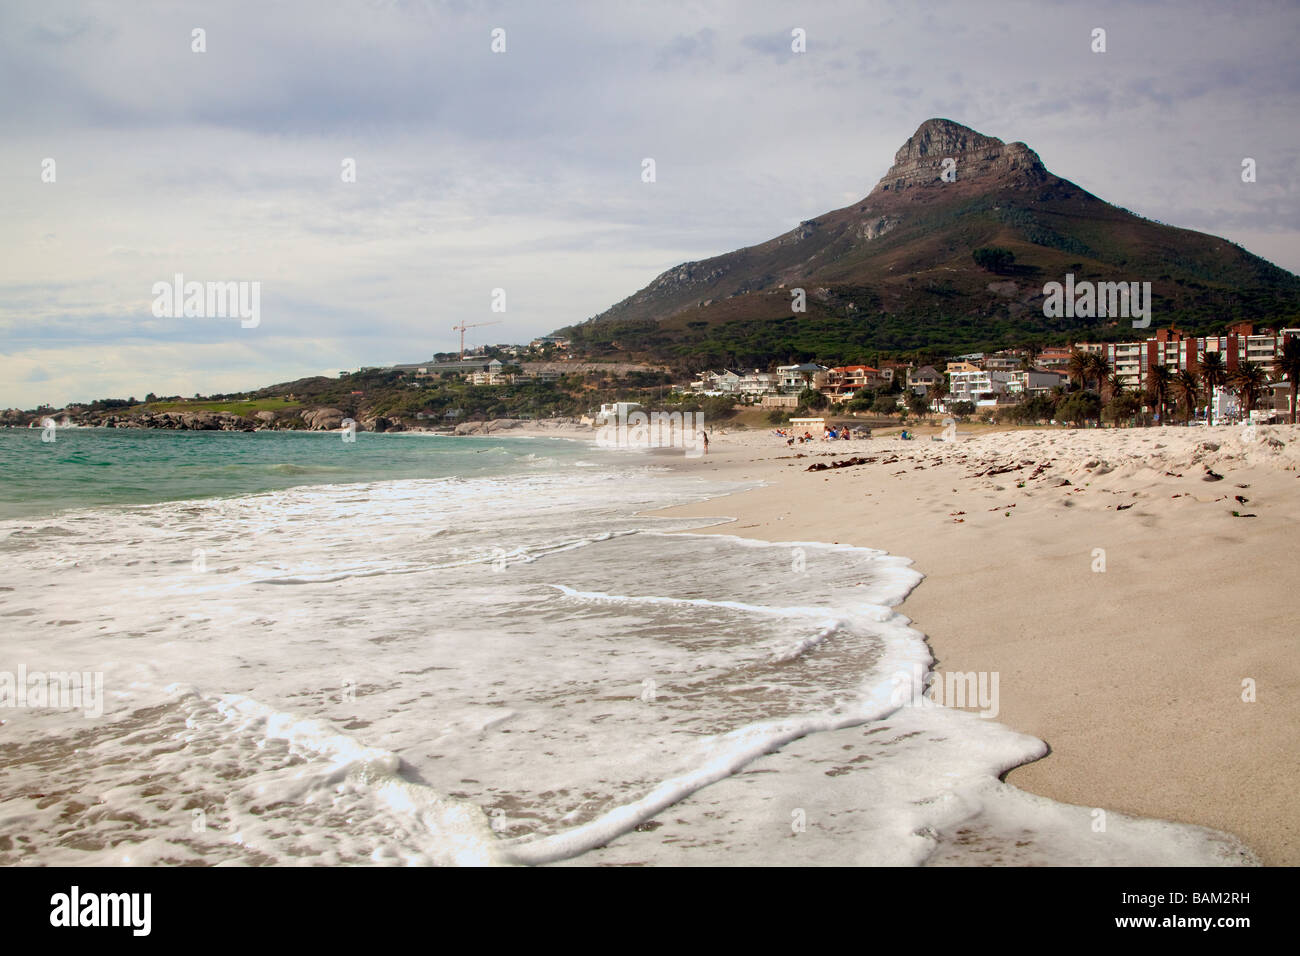 View along surf and beach to mountain at Camps Bay, Cape Town, South Africa Stock Photo